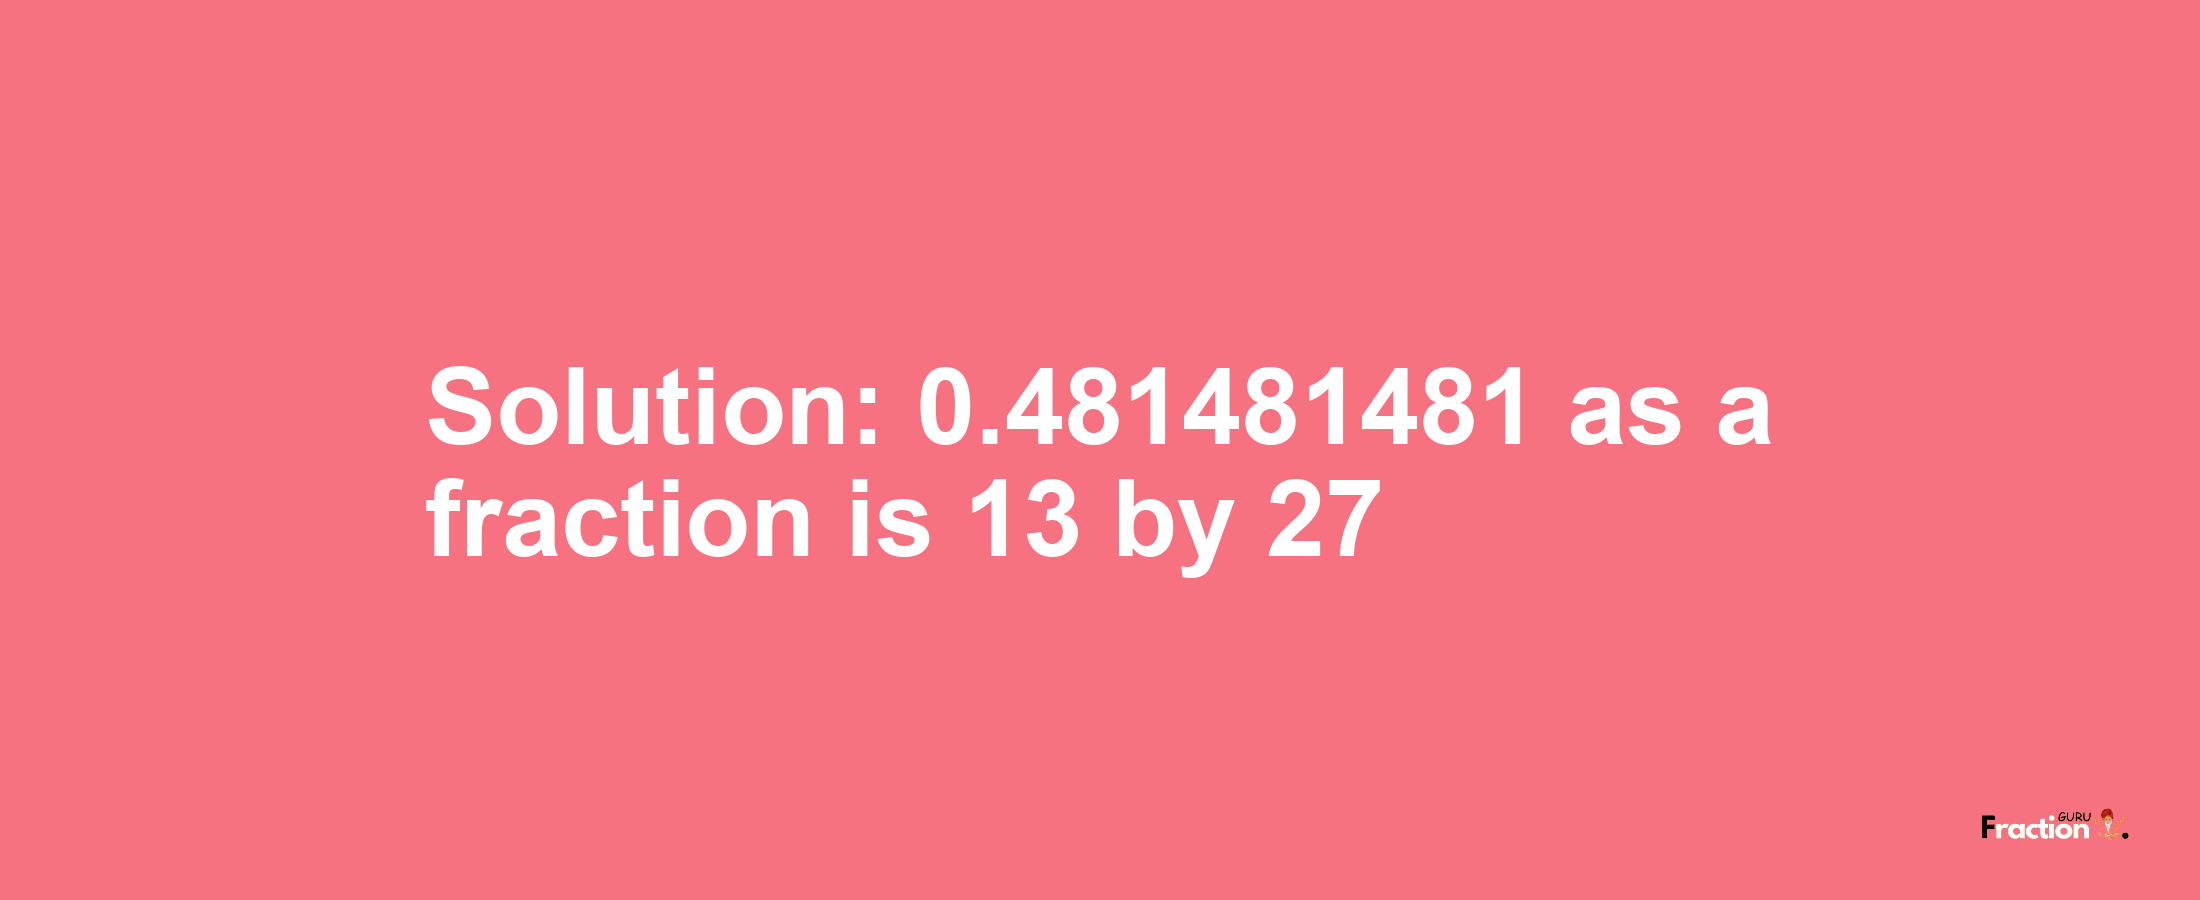 Solution:0.481481481 as a fraction is 13/27